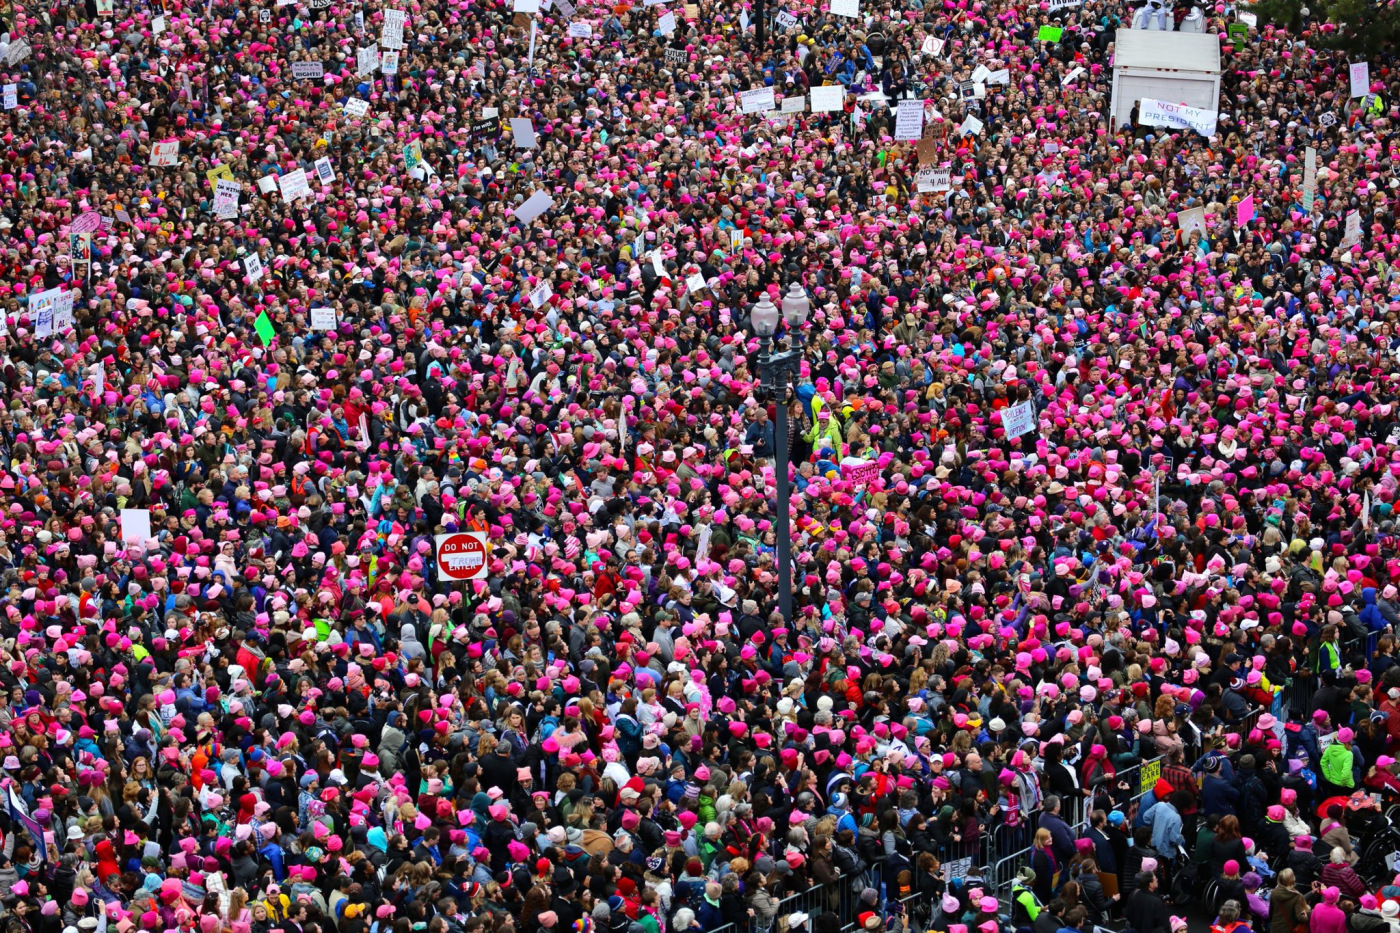 Women's March, anti-Trump protests, Trump resistance, women's rights, mass protests, global protests, pussy hats, people against Trump